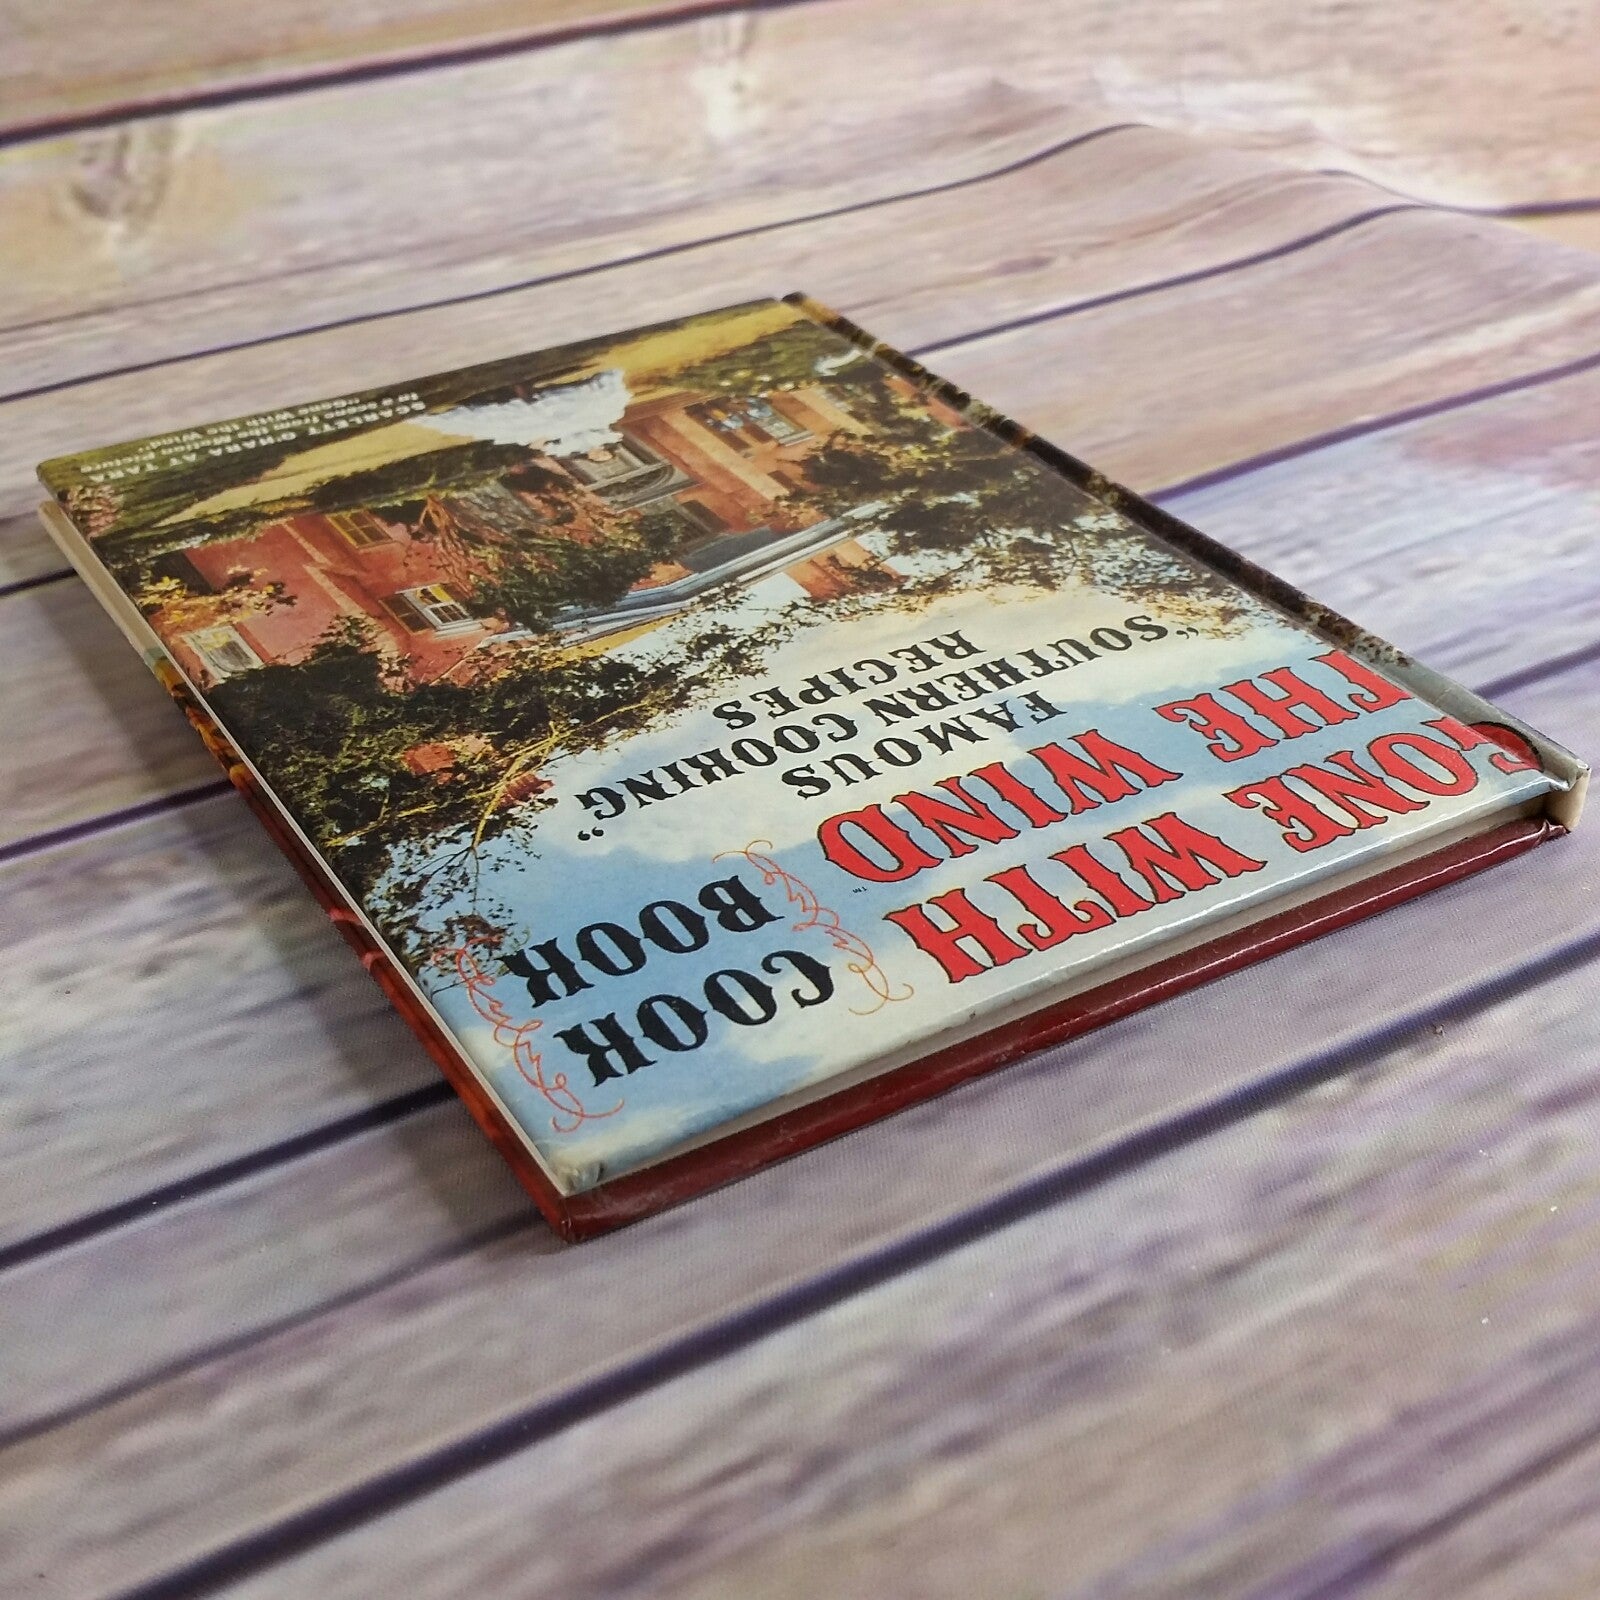 Vintage Cookbook Gone With The Wind Cook Book Hardcover 1991 Famous Southern Cooking Recipes - At Grandma's Table